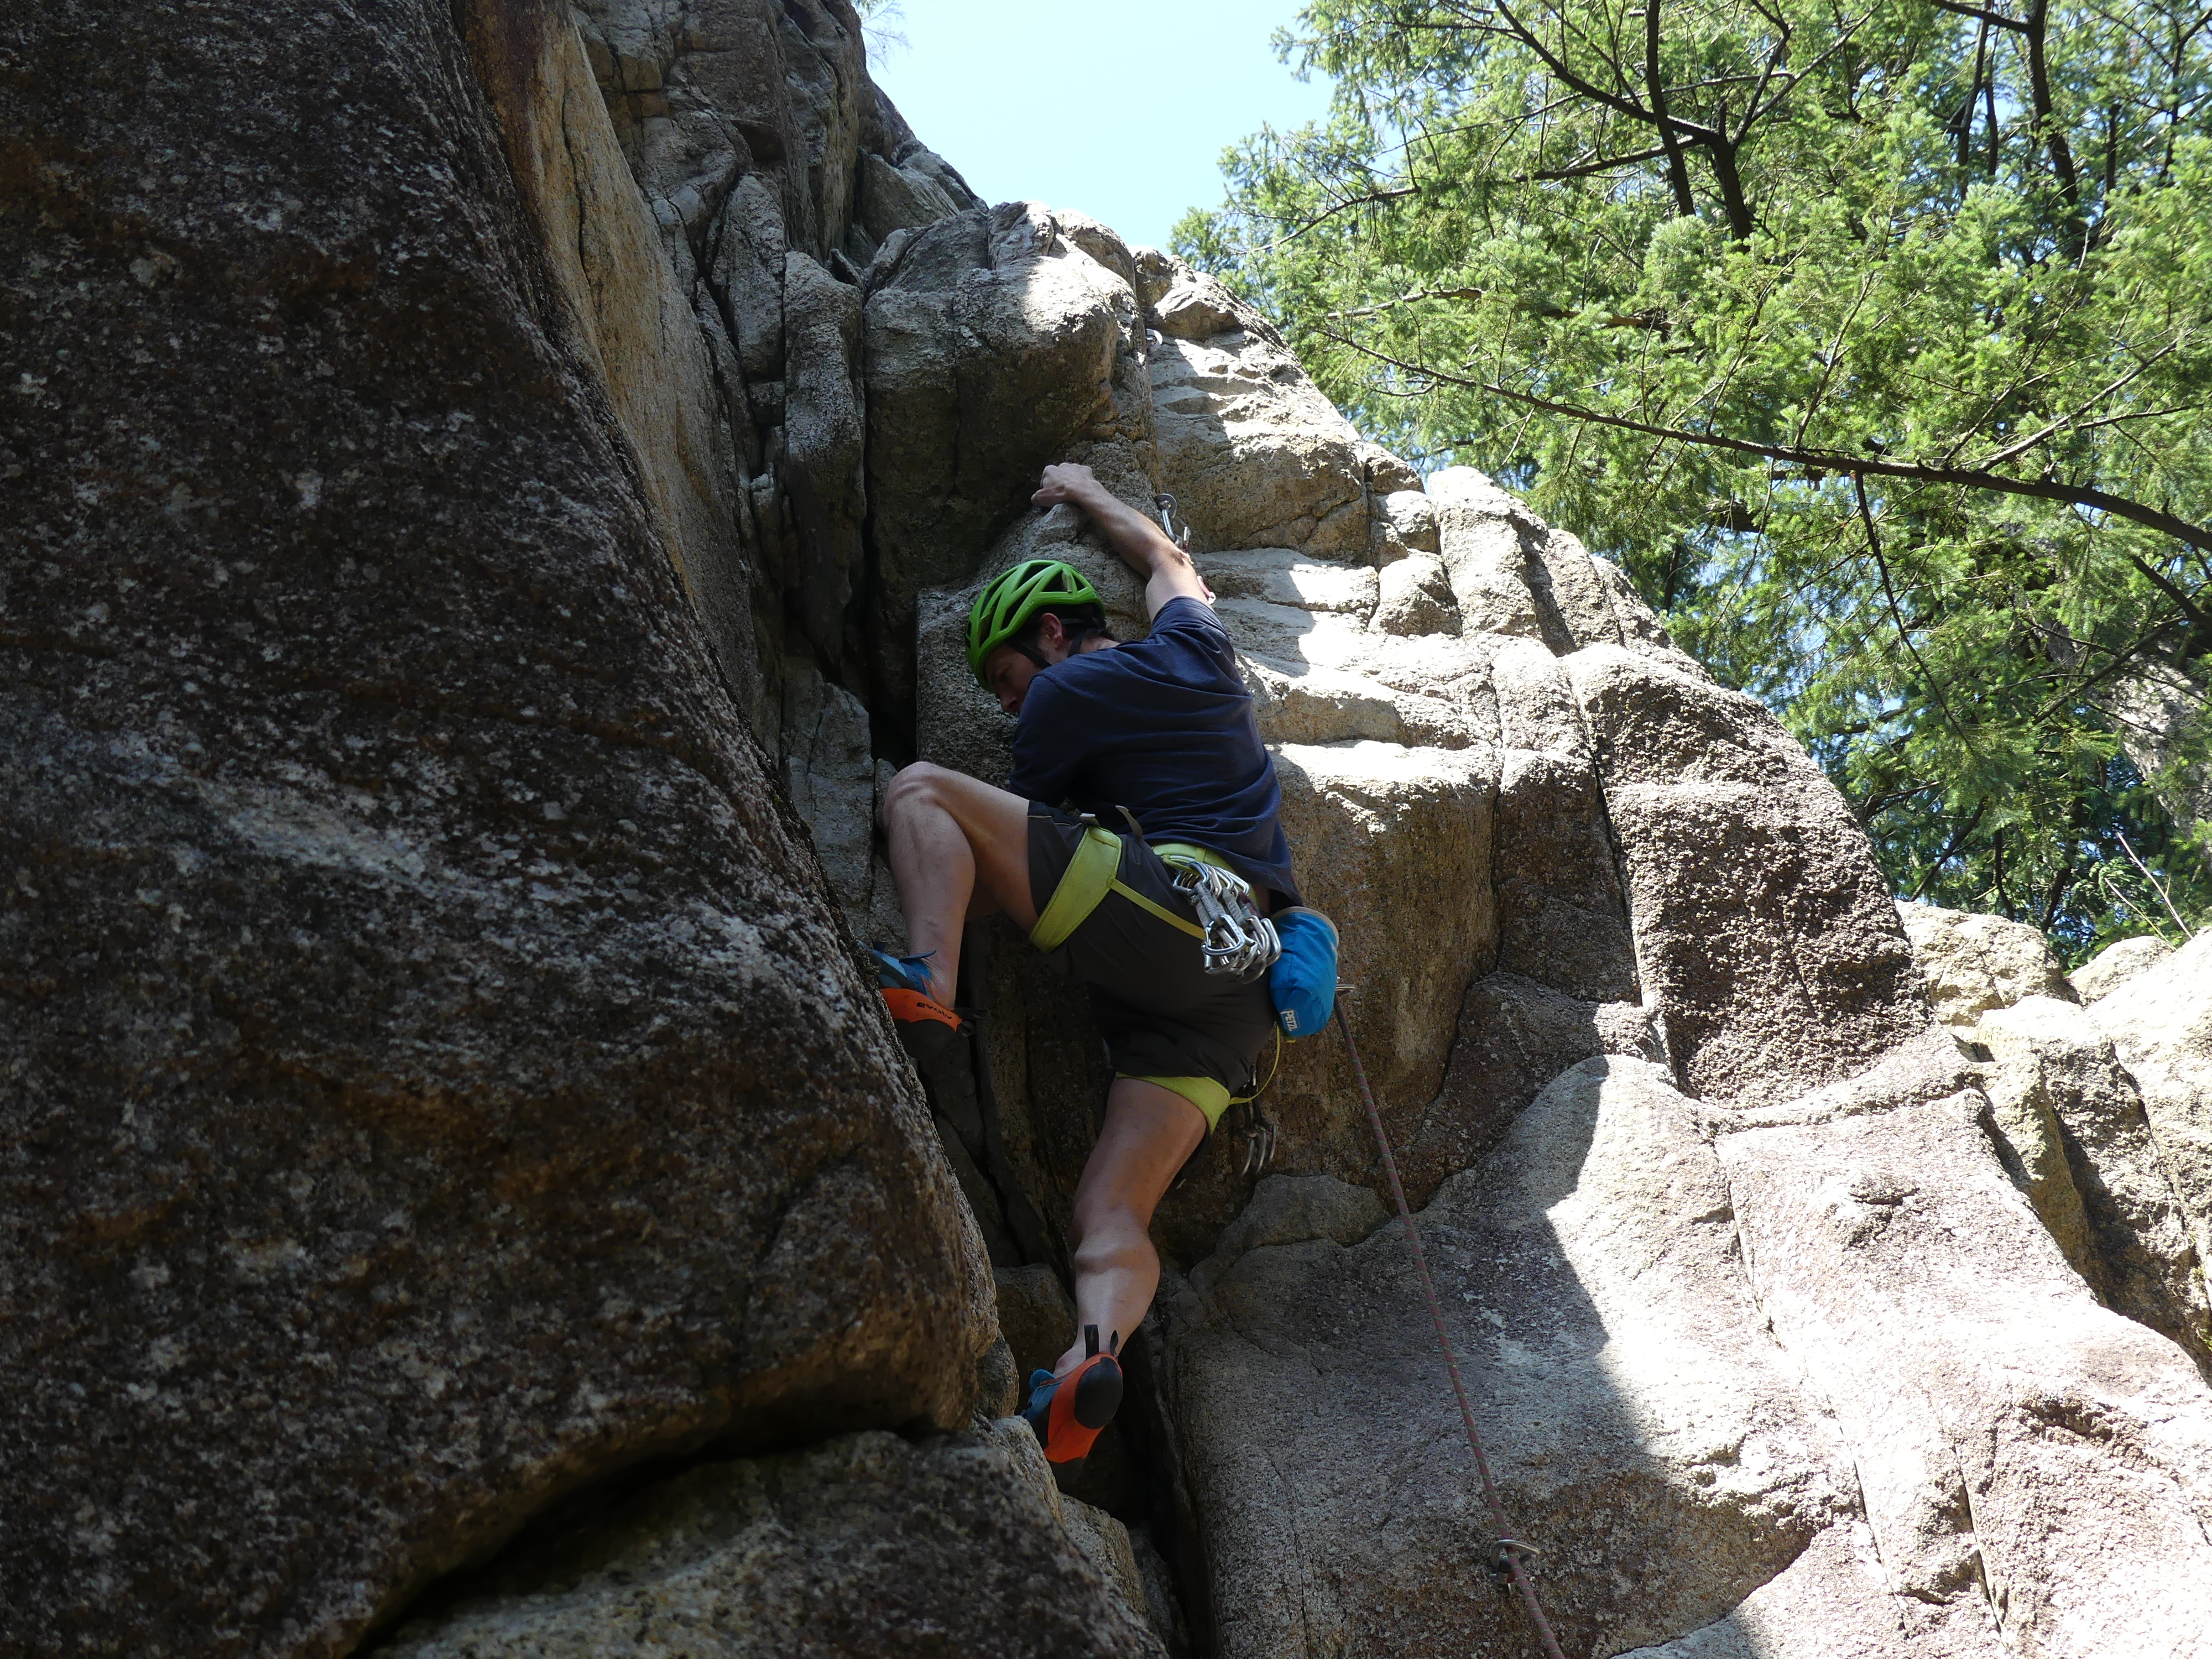 Alexei on Wavy Gravy (grade 5.10d) on Woodstock wall at Murrin Park, on his way to the redpoint (second attempt).